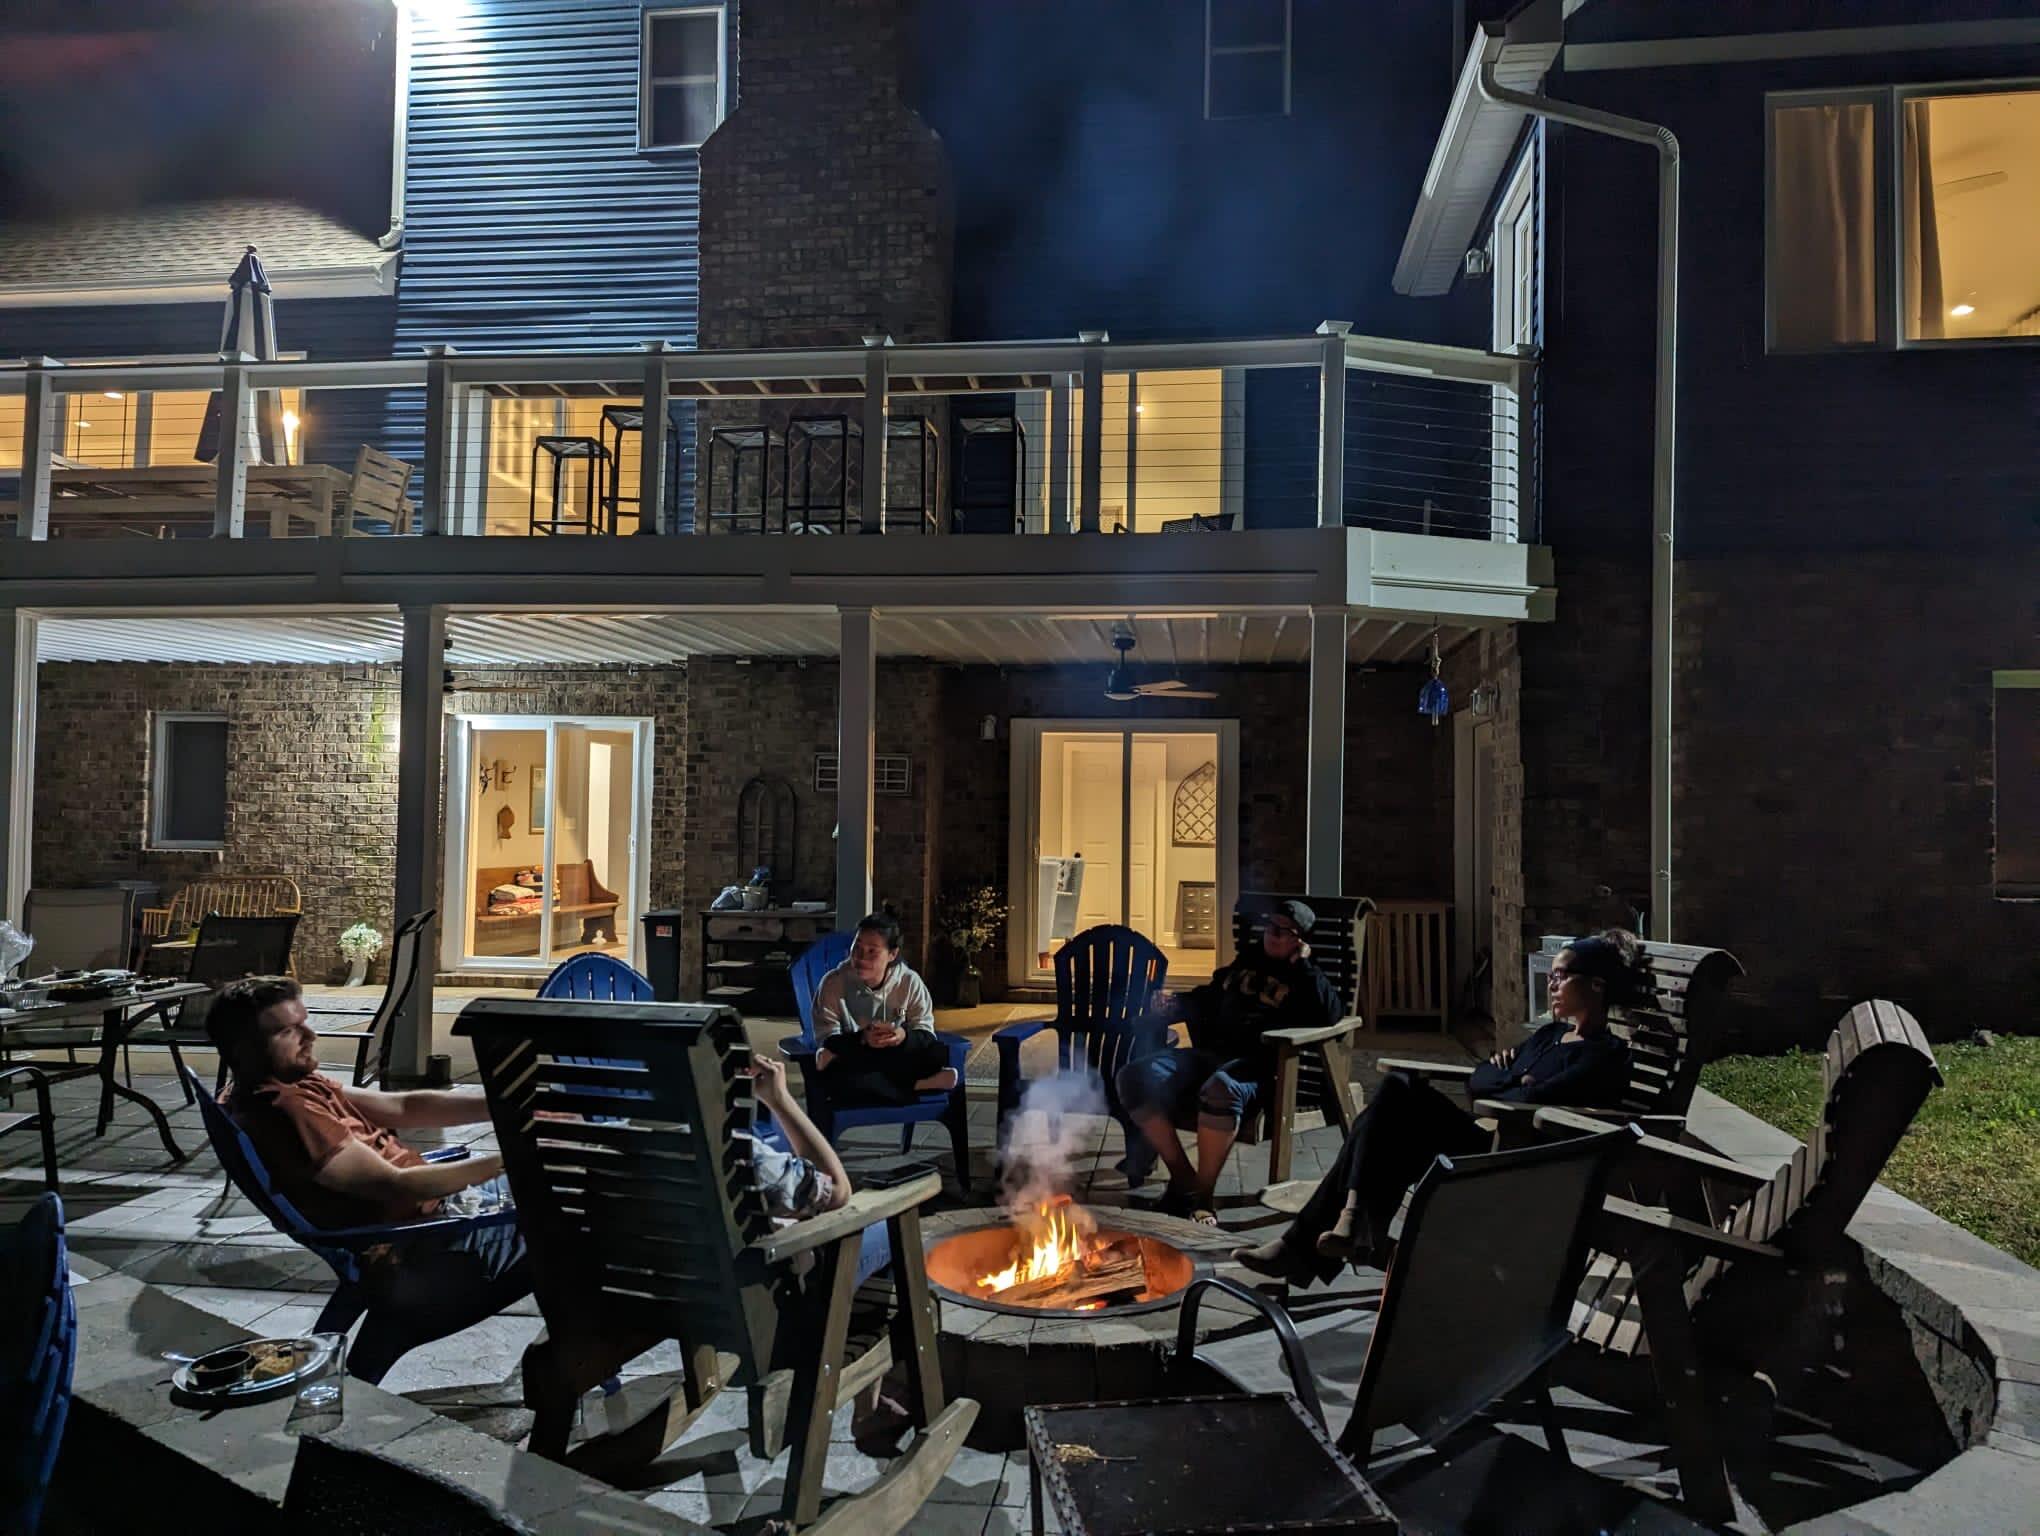 A photo of a fire pit with several chairs around it at nihgt. There are five people sitting around the fire. The fire pit is adjacent to a house. 